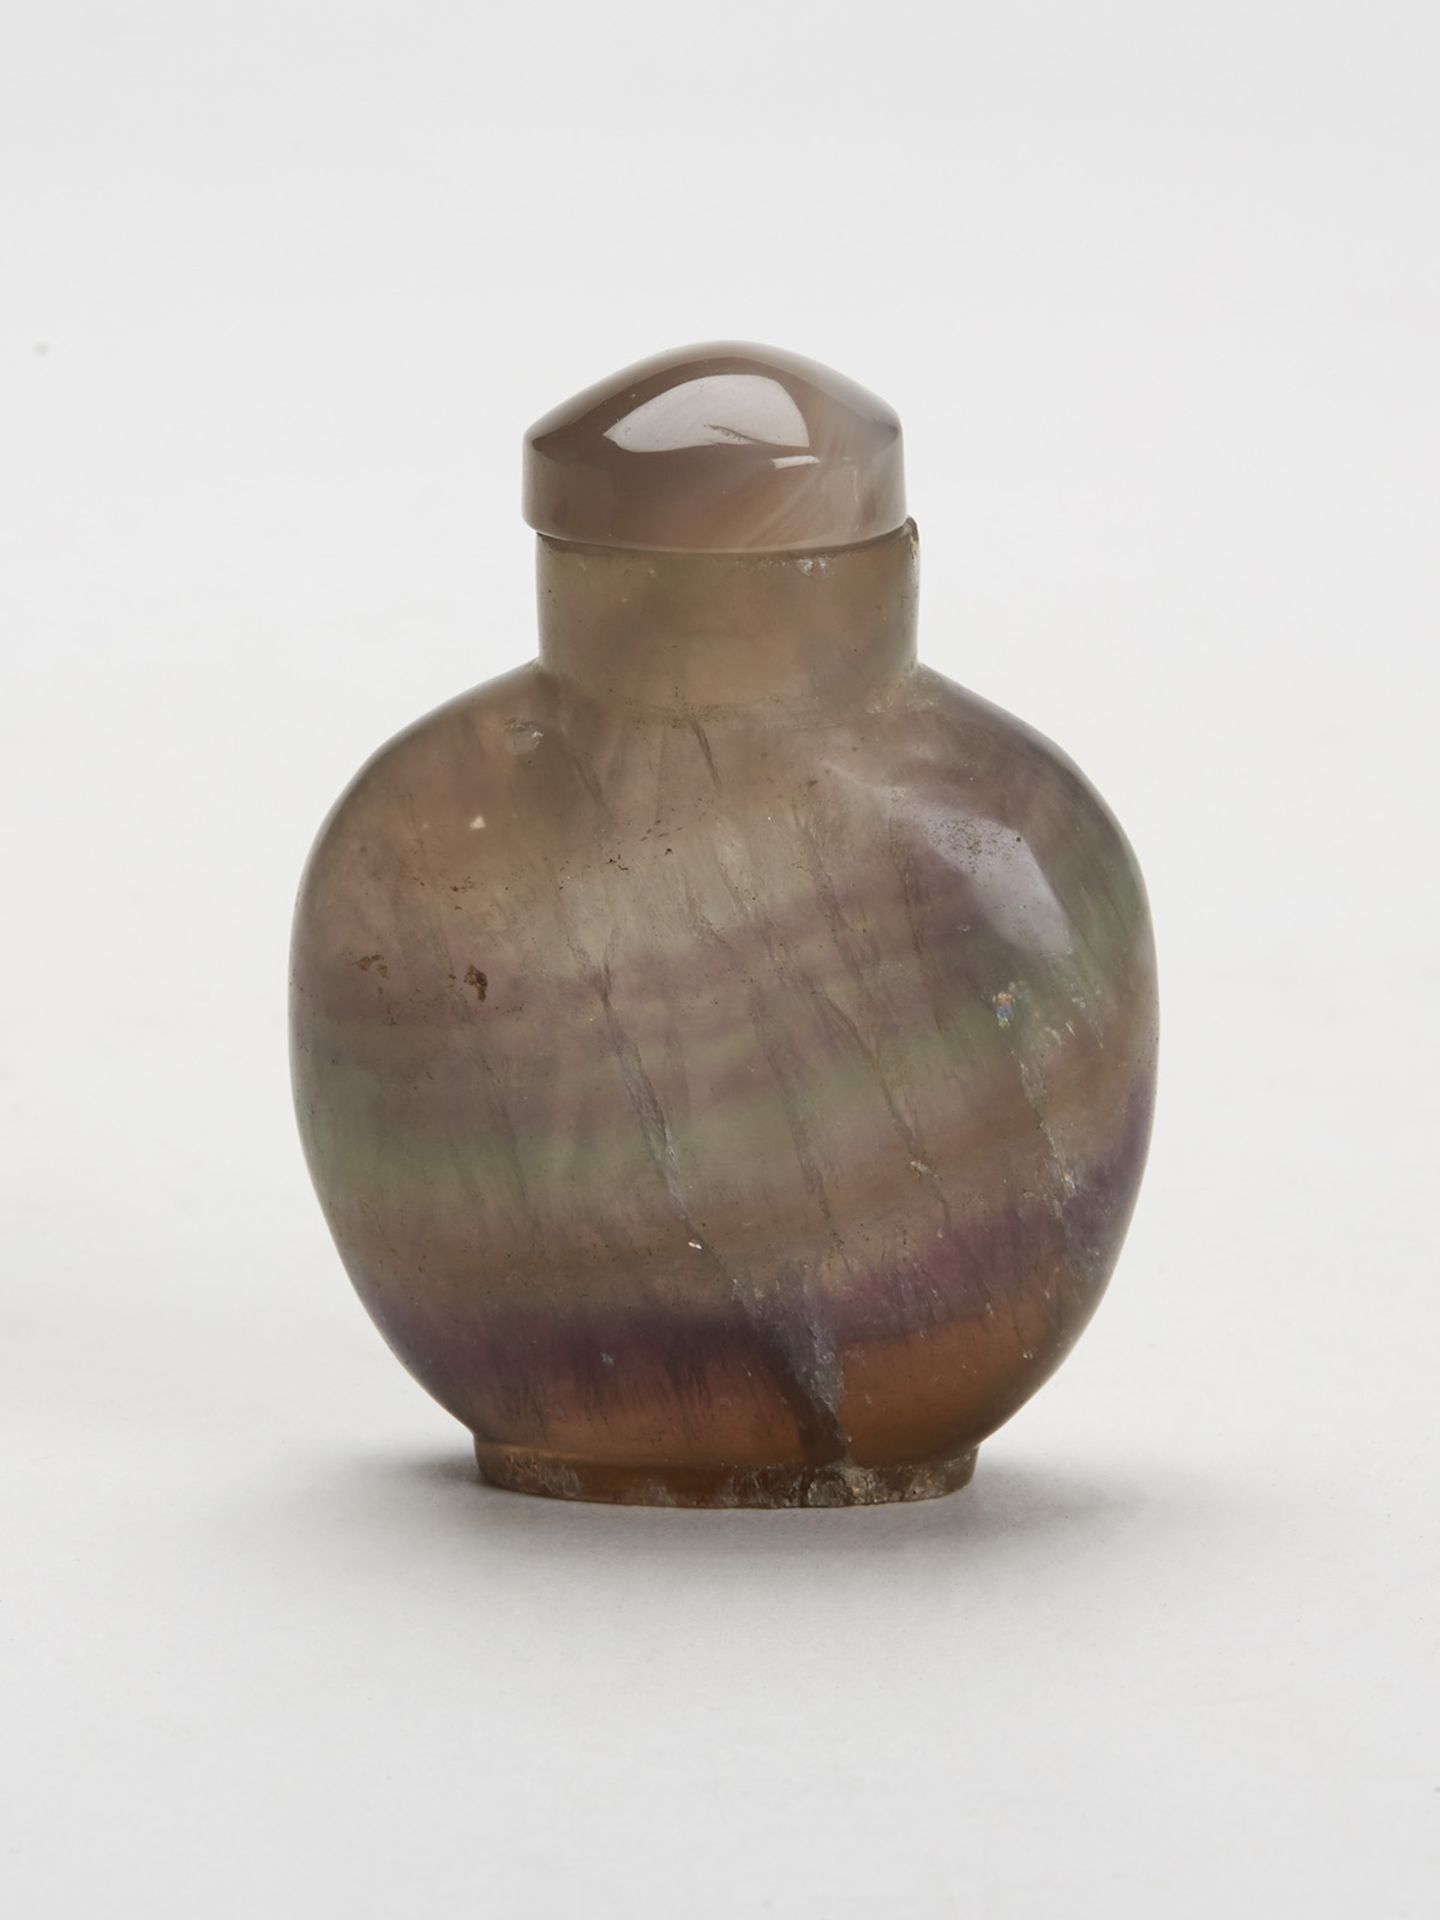 Antique Chinese Hardstone Snuff Bottle 18Th C.